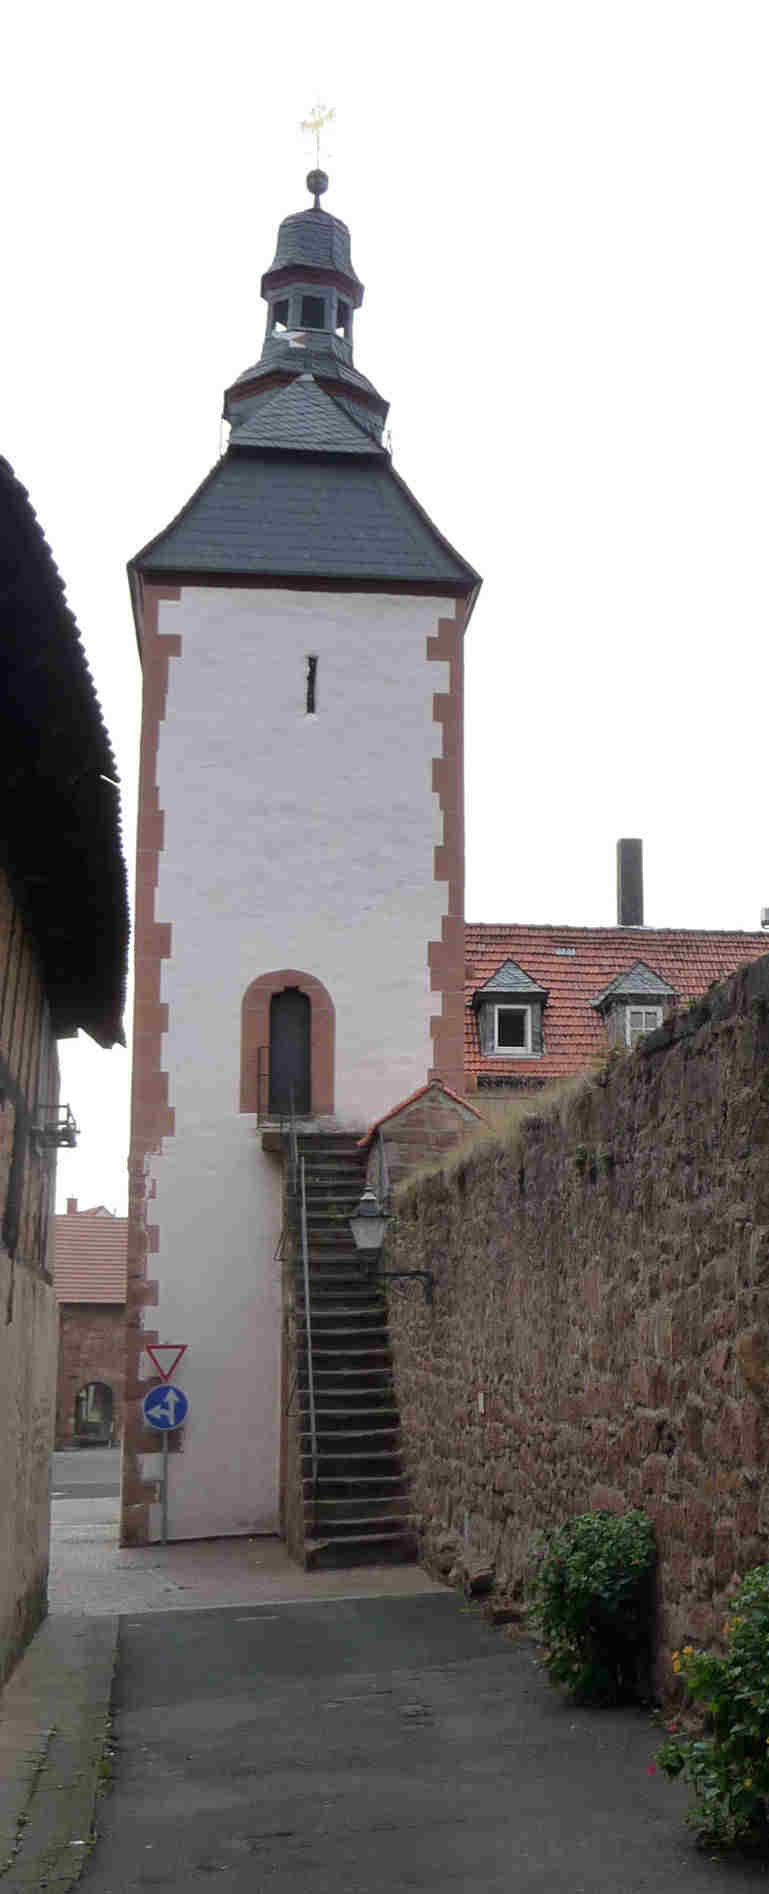 Obg Oberes Tor mit Treppe 2011